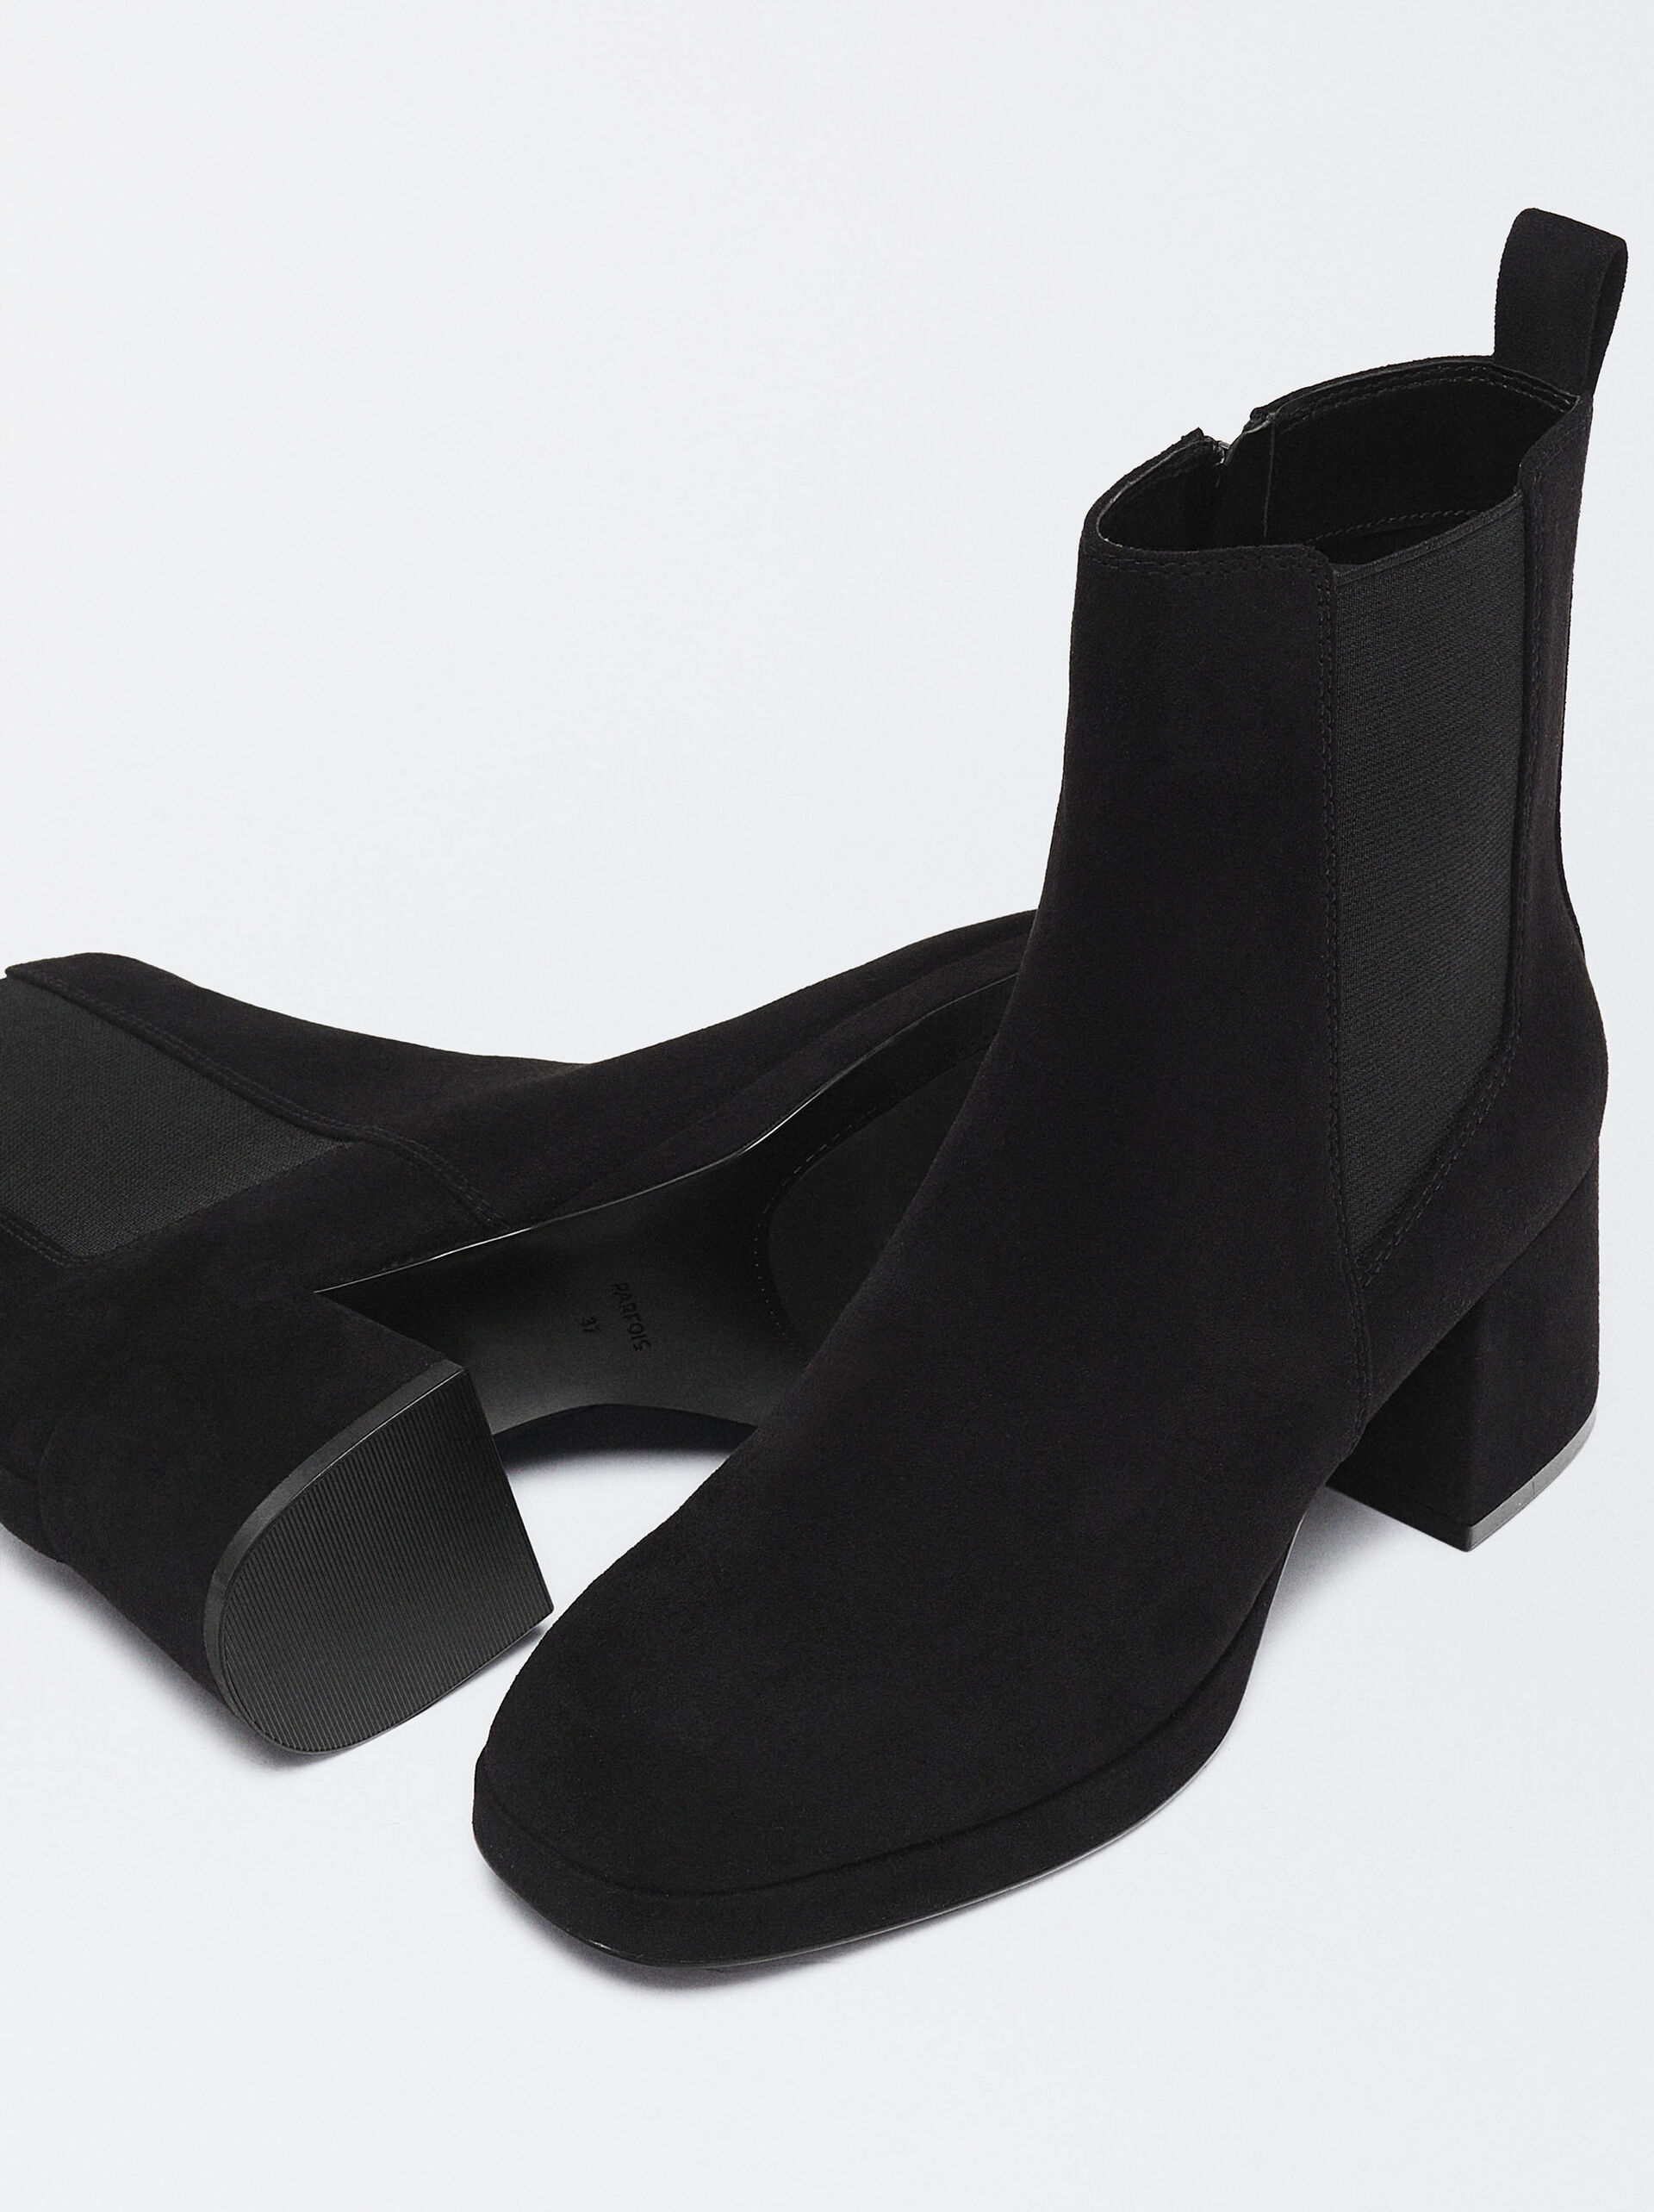 Suede Effect Ankle Boots image number 4.0